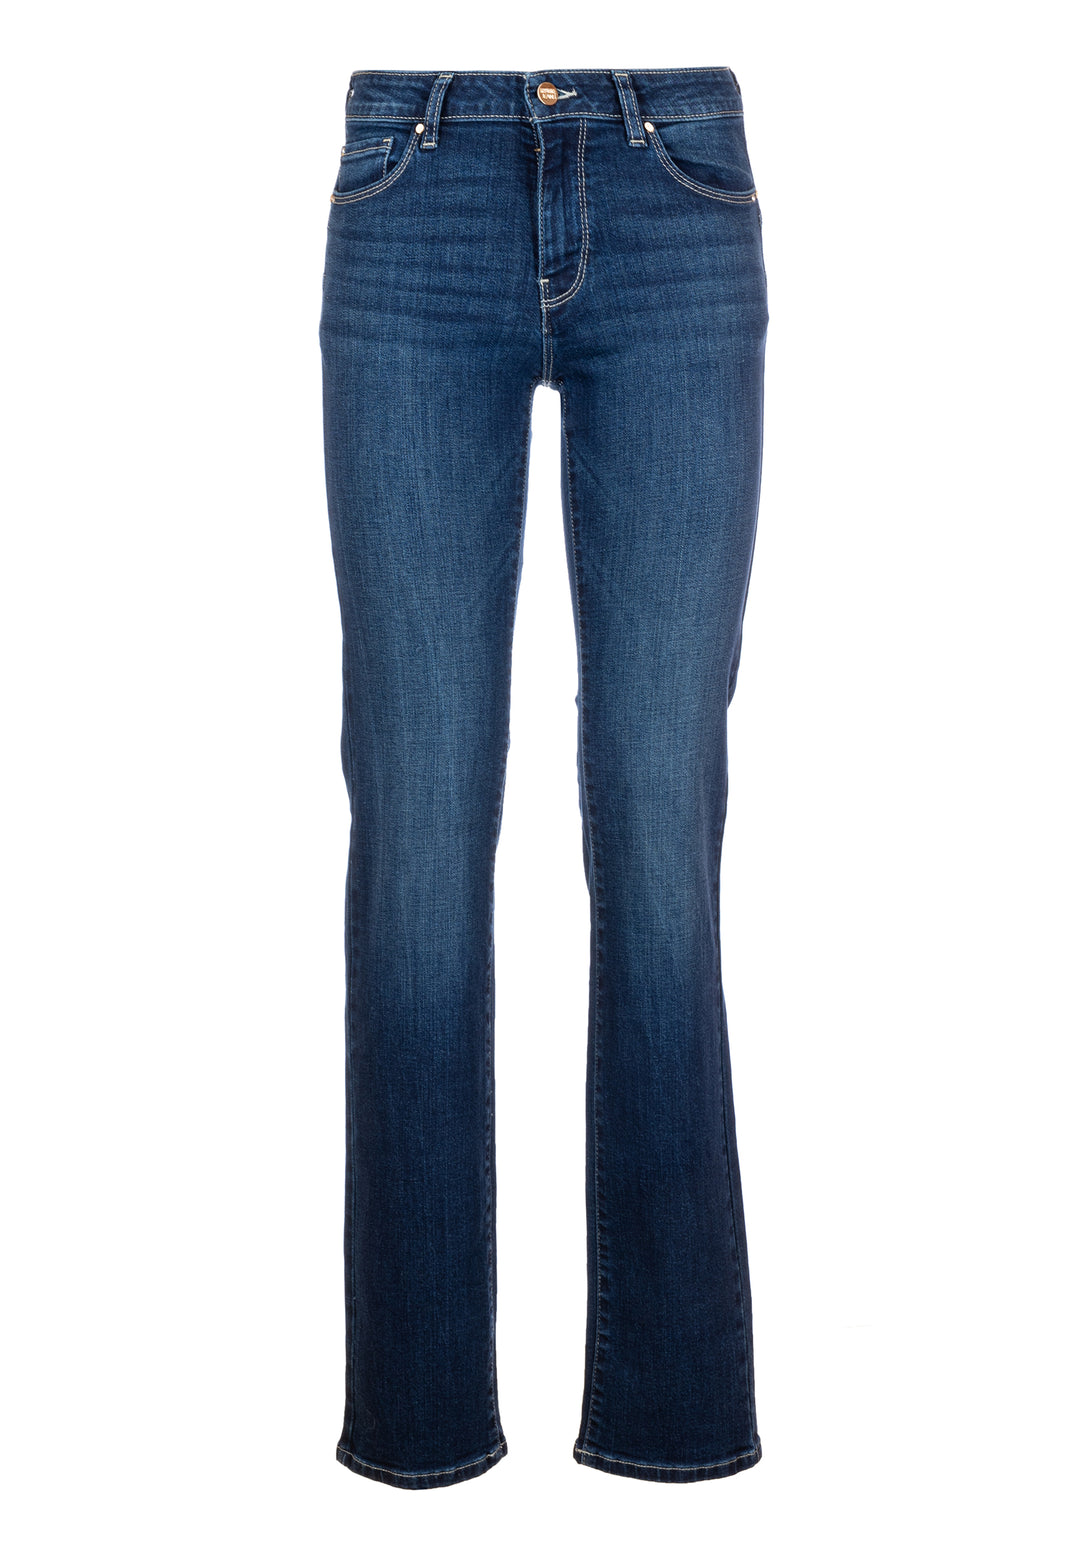 Jeans flare with push up effect made in denim with middle wash